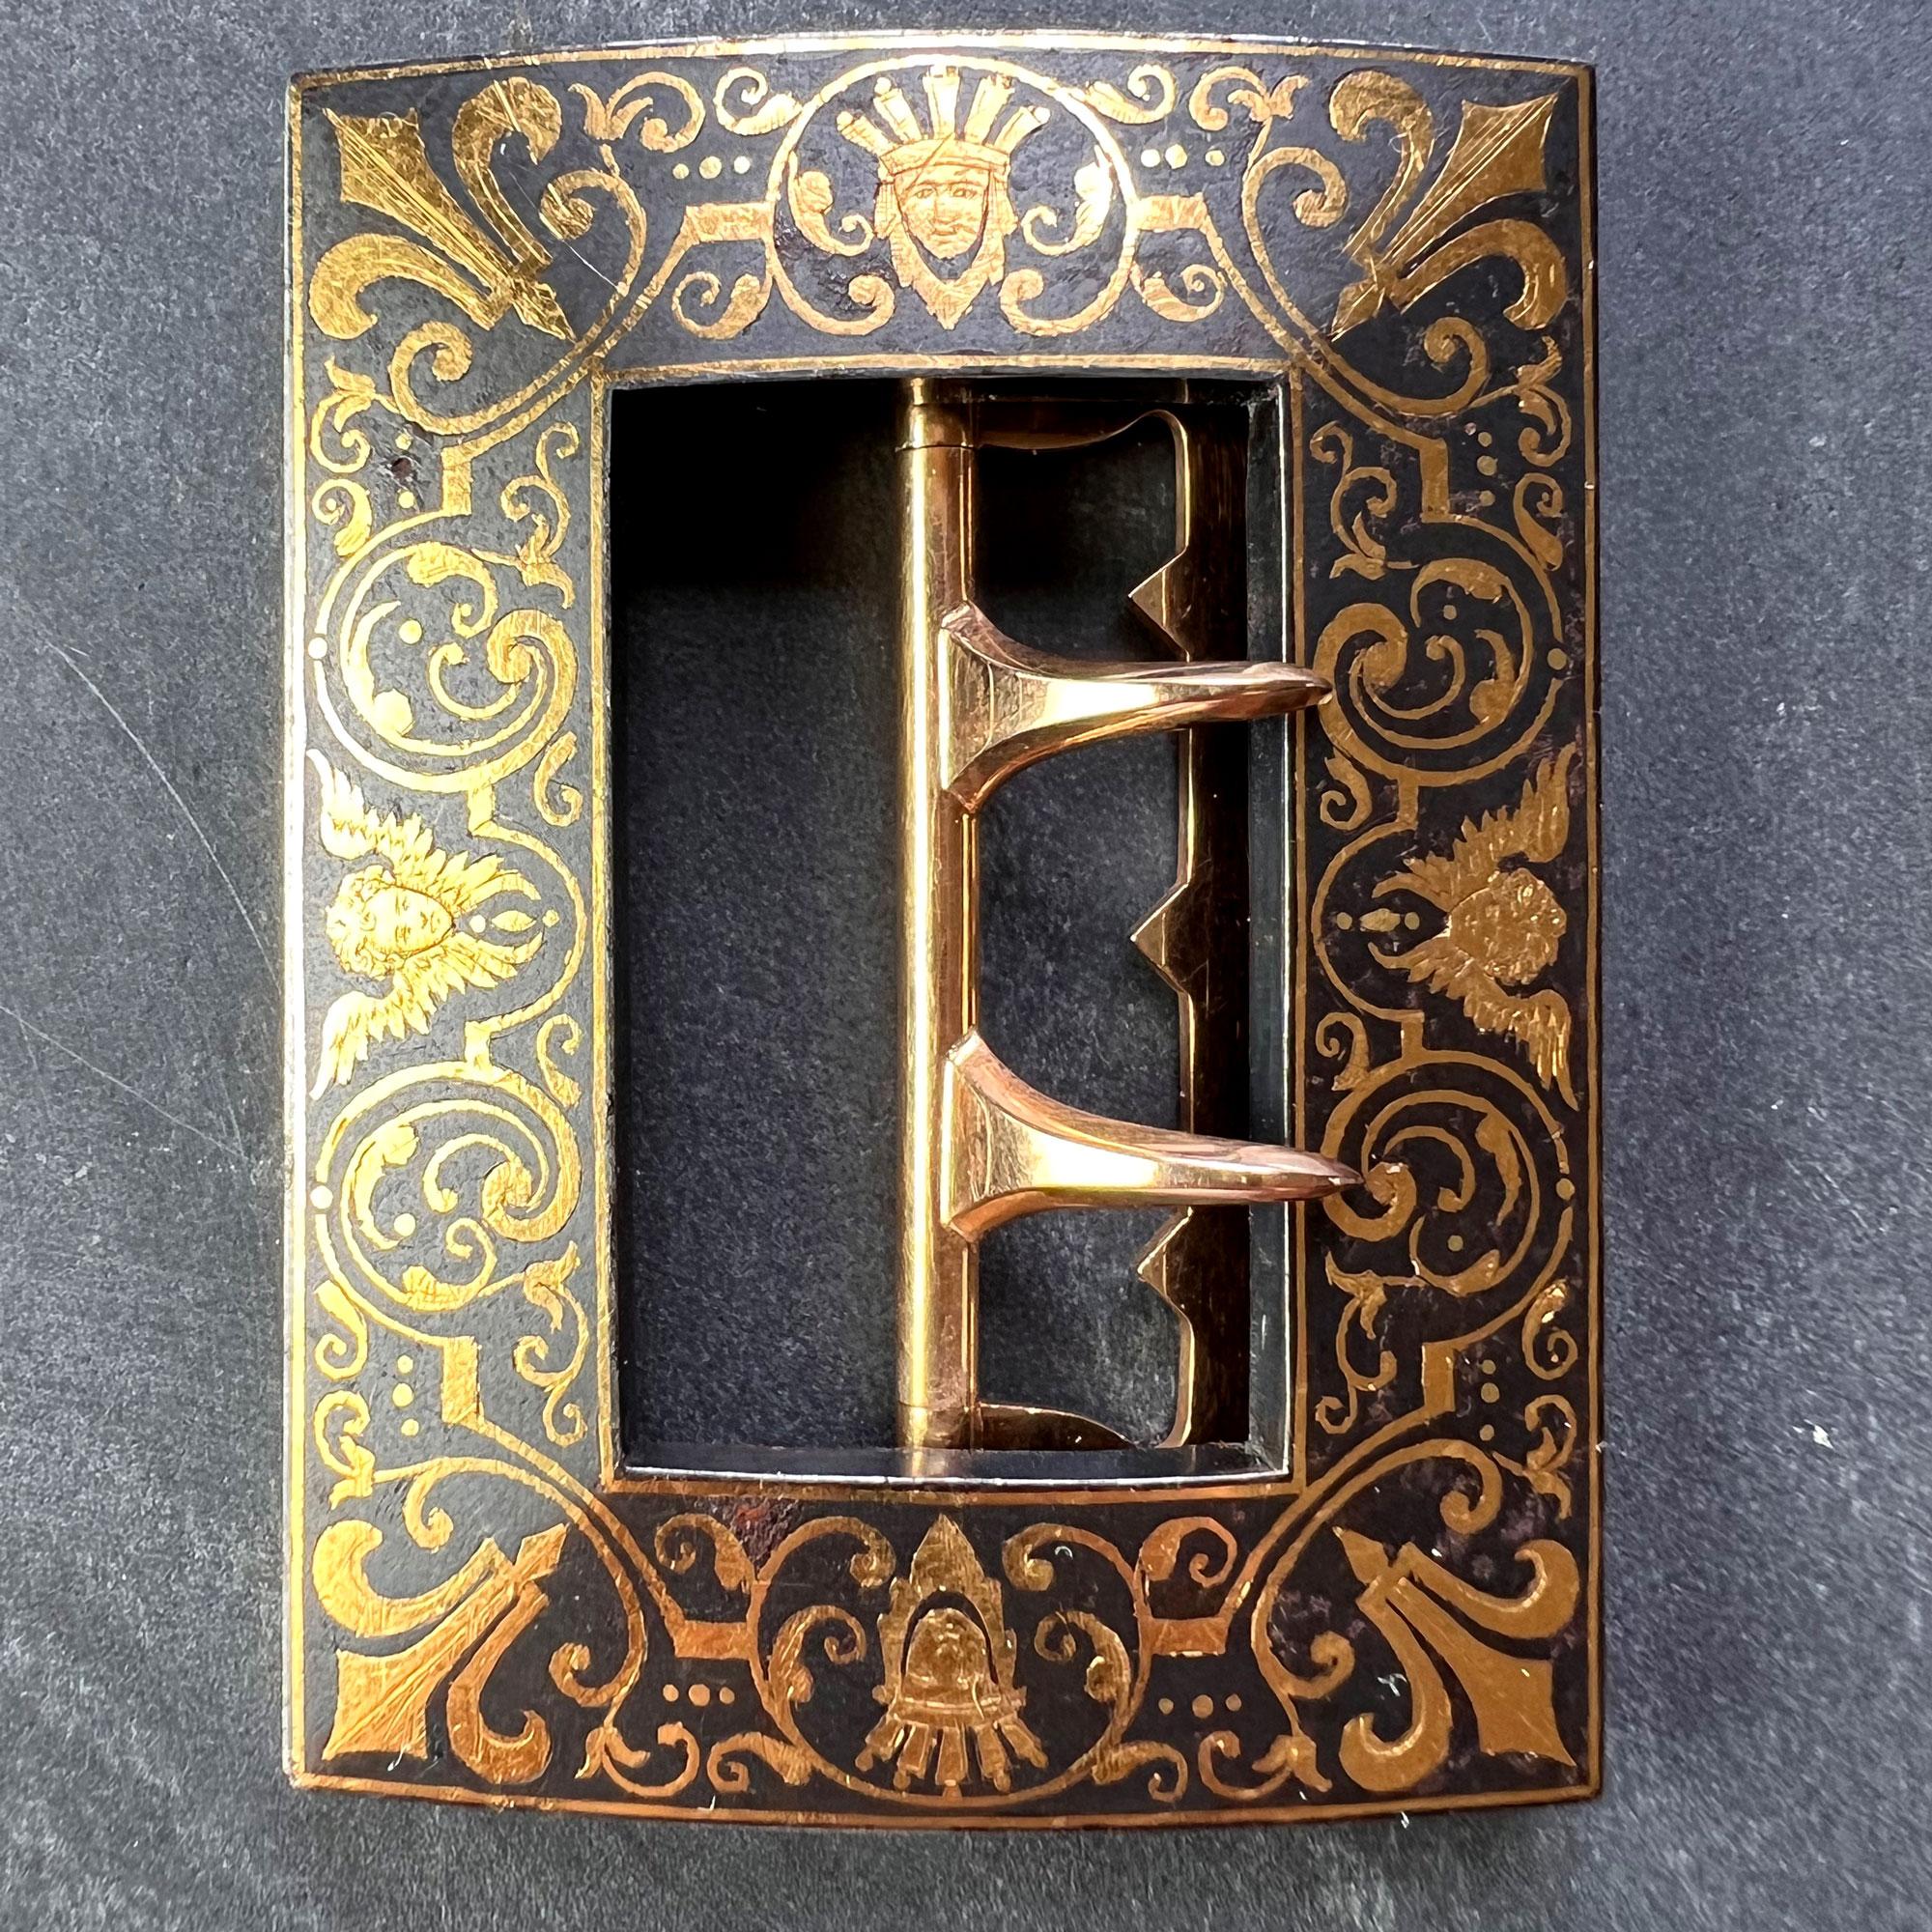 A blackened steel and 18 karat (18K) yellow gold Damascene belt buckle designed as a rectangle with inlaid gold designs of angels and geometric lines in the style of Boucheron. Stamped with the owl for 18K gold and French import to the buckle claws